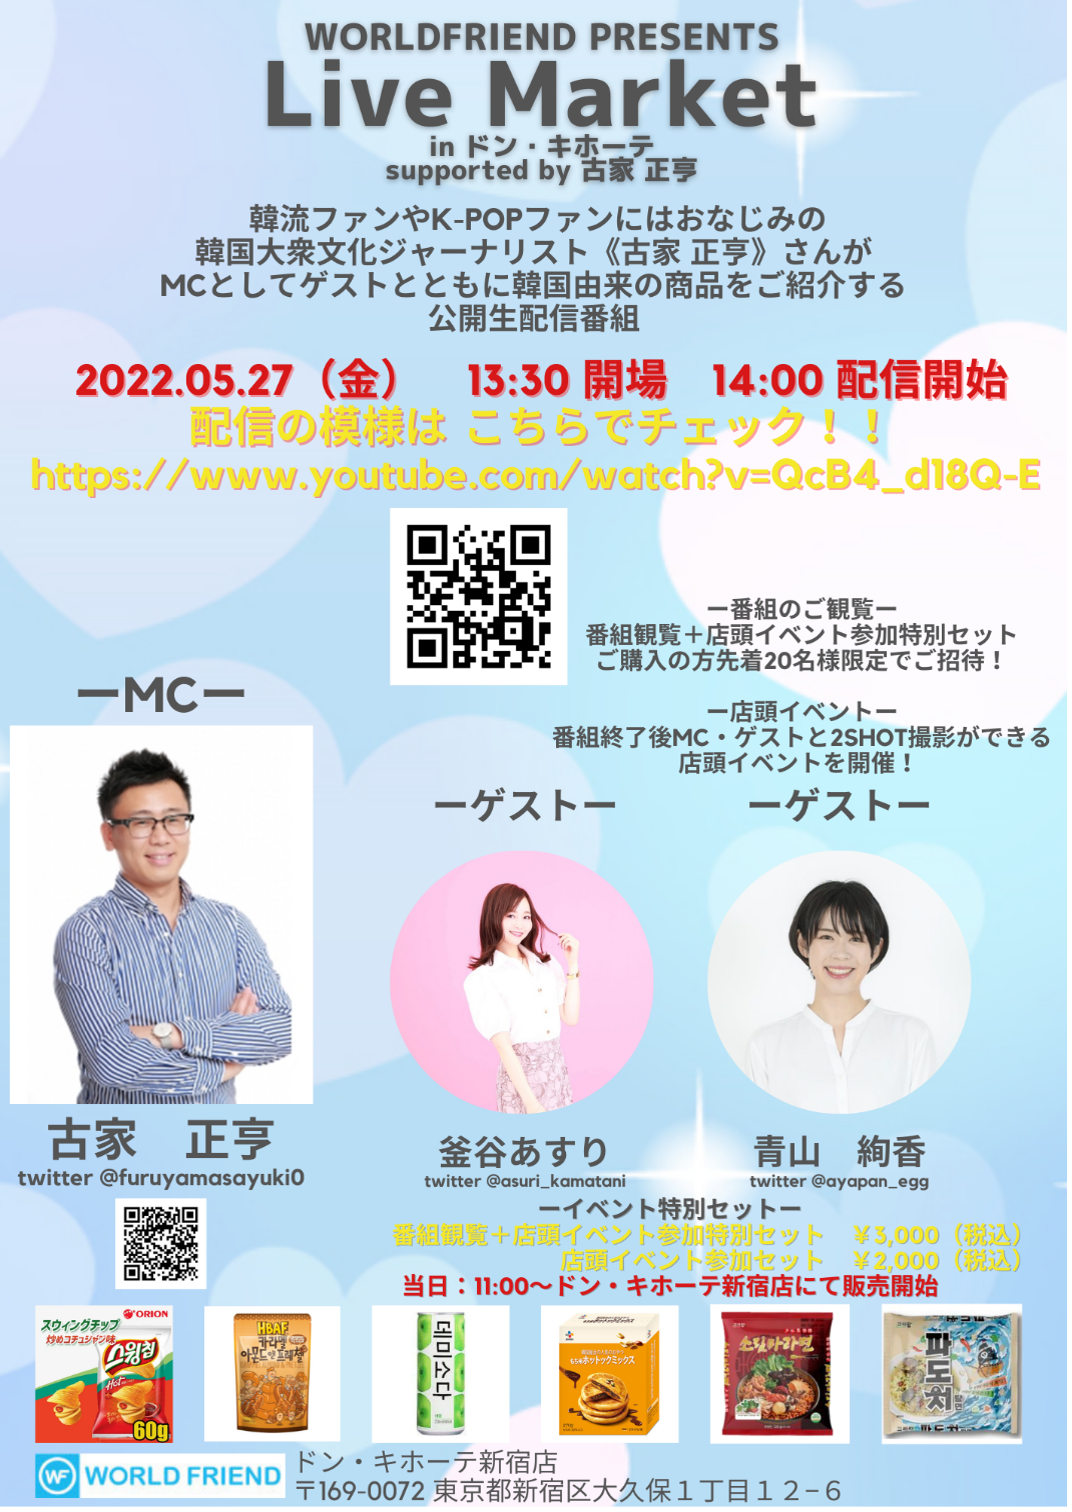 「WORLDFRIEND PRESENTS Live Market  in ドン・キホーテsupported by 古家 正亨」